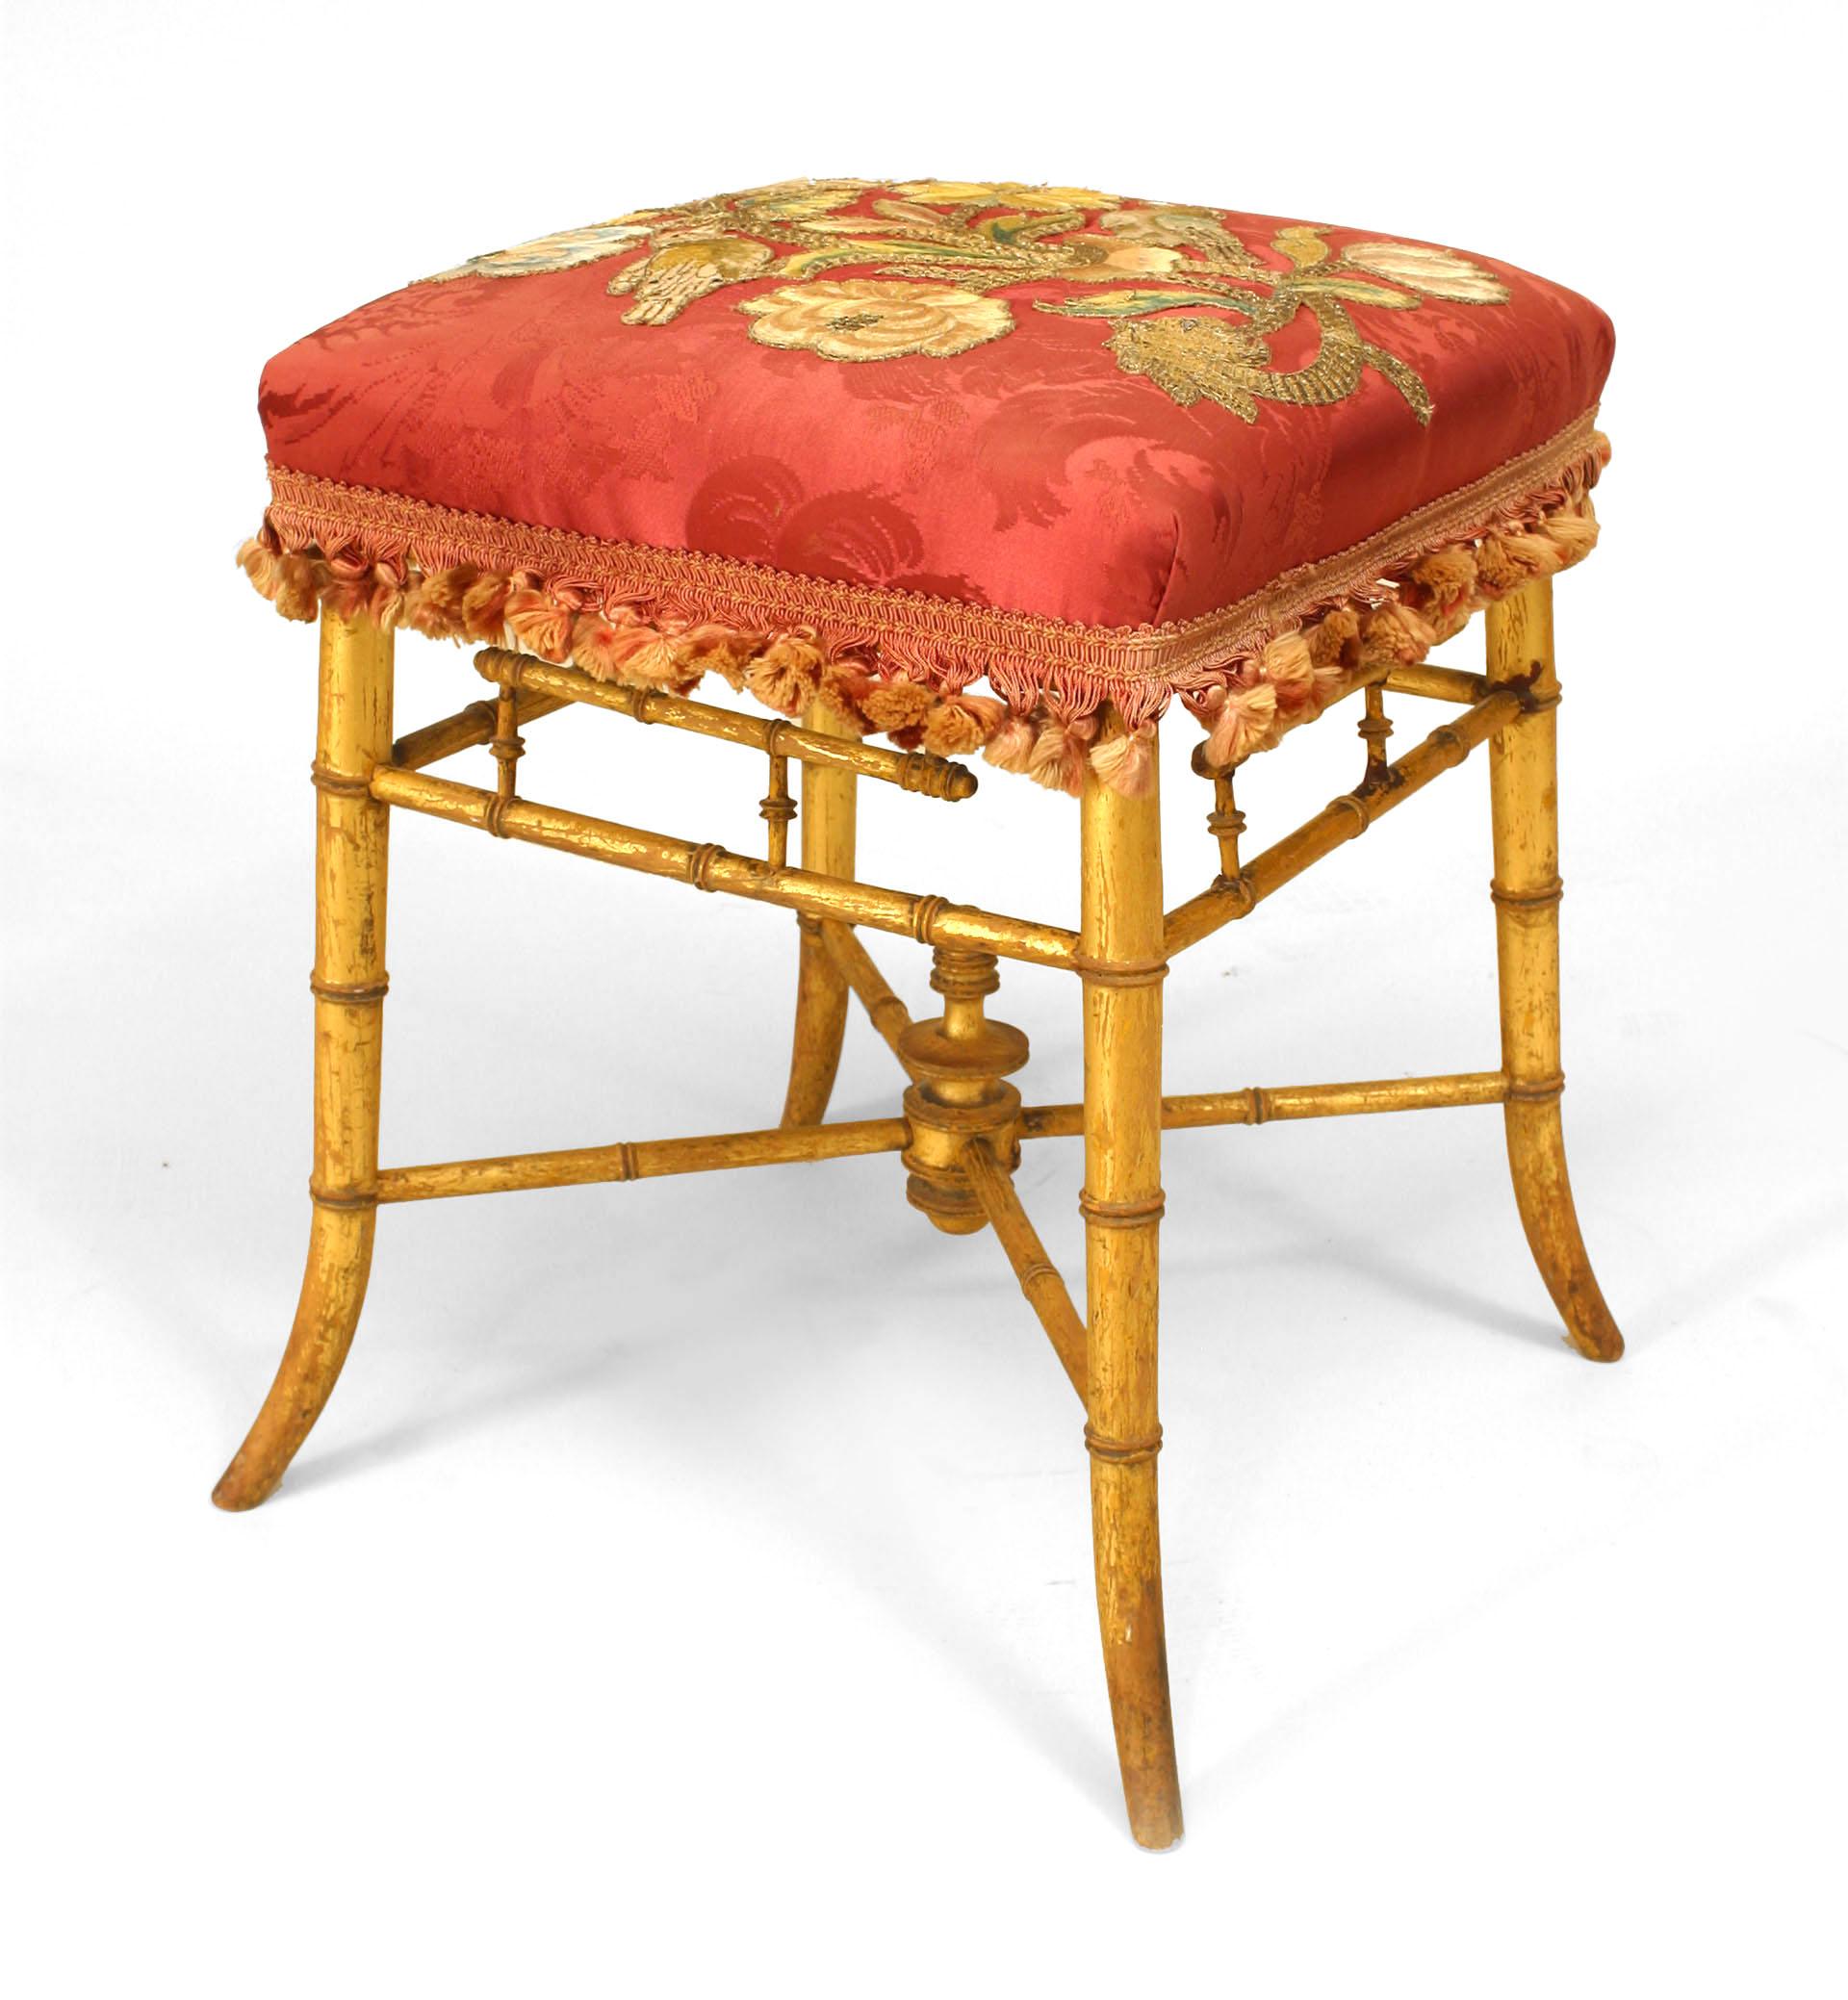 Nineteenth century French faux bamboo gilt square bench with a stretcher and rose damask upholstered seat with applied floral embroidery.